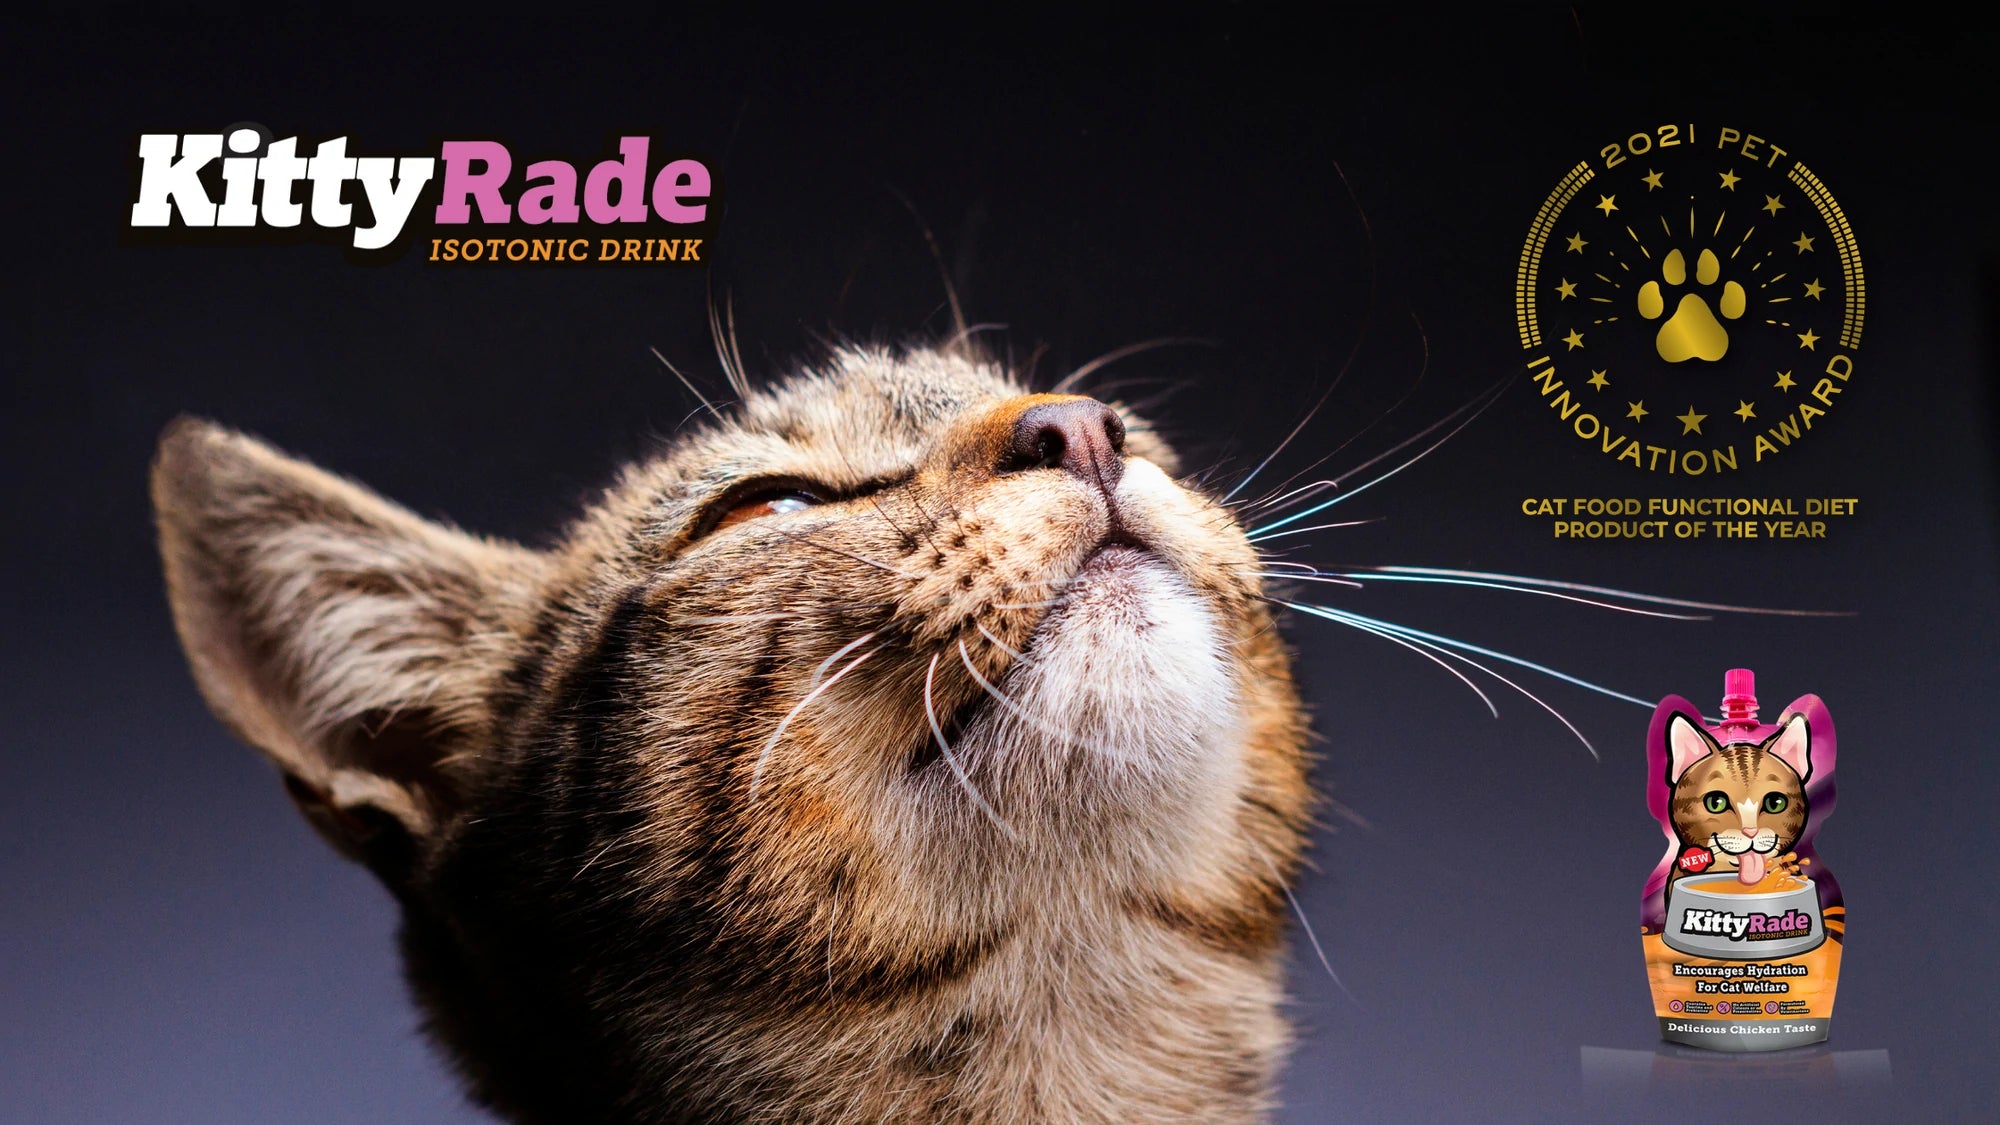 KittyRade wins the Cat Food Functional Diet Product of the Year